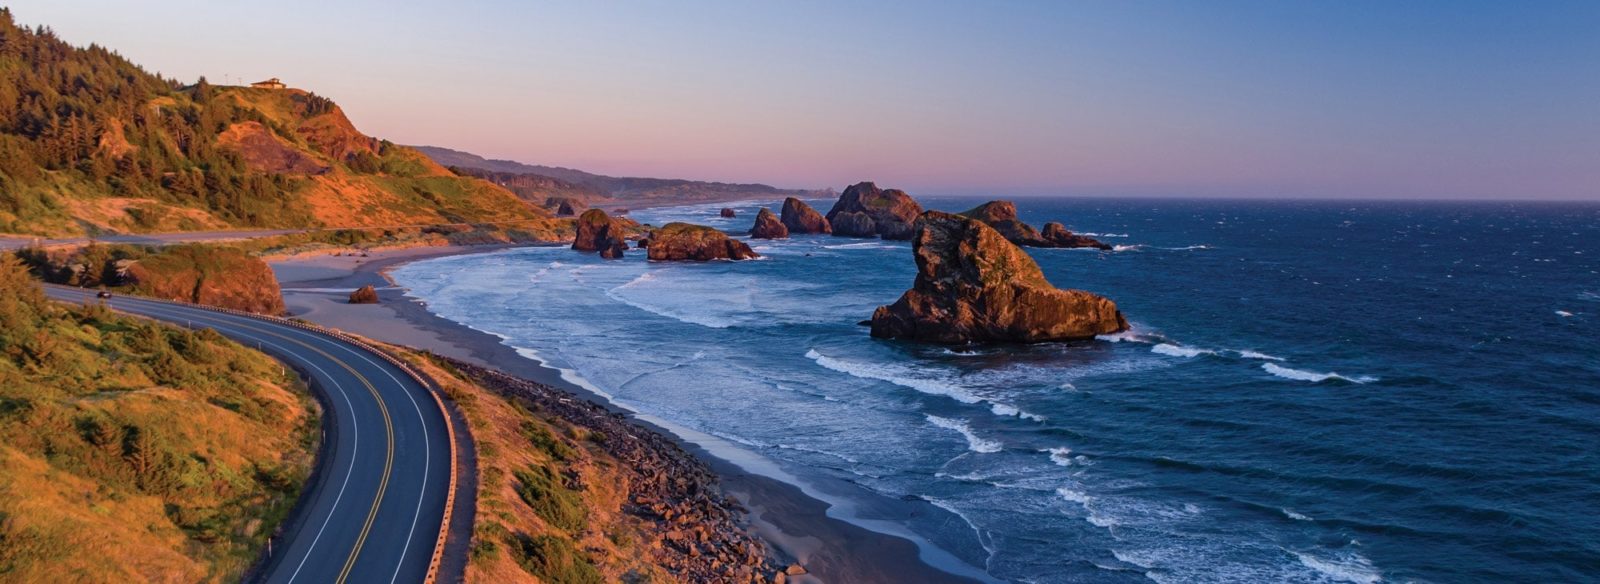 An image of the Pacific Coast Scenic Byway